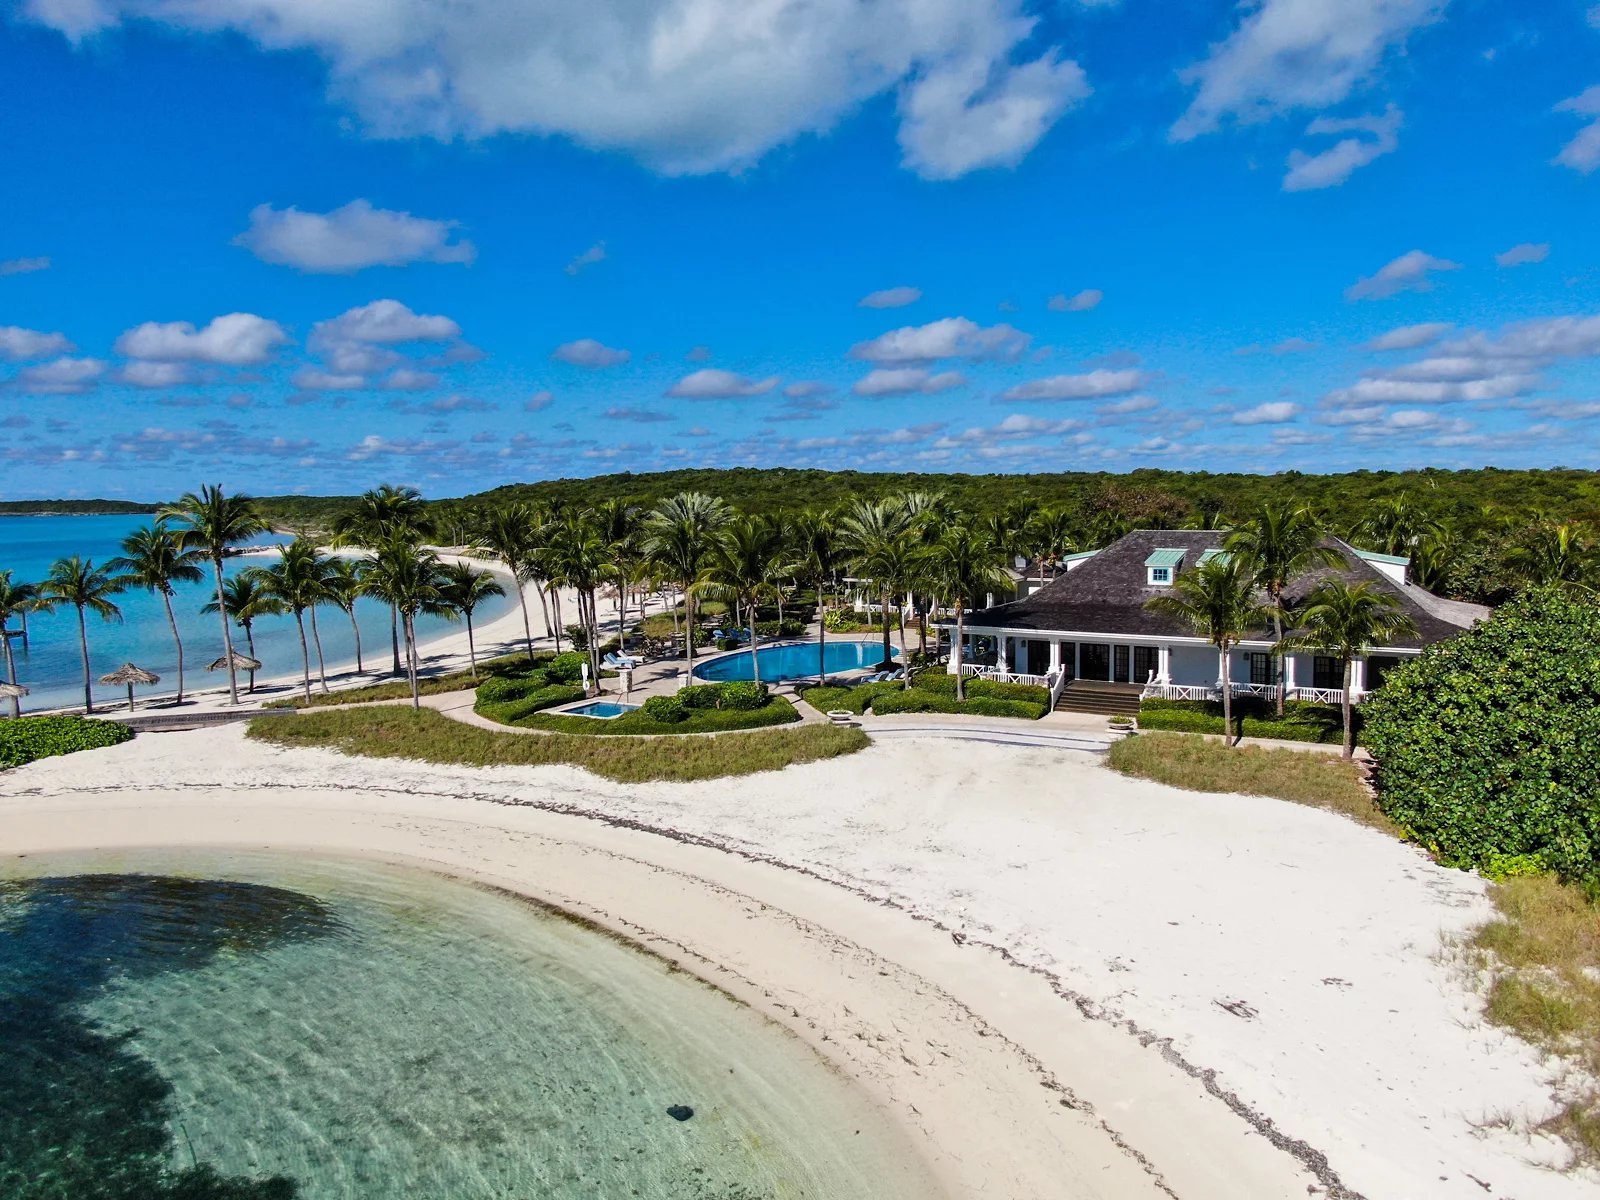 royal island, the perfect private island opportunity - mls 51444 image4